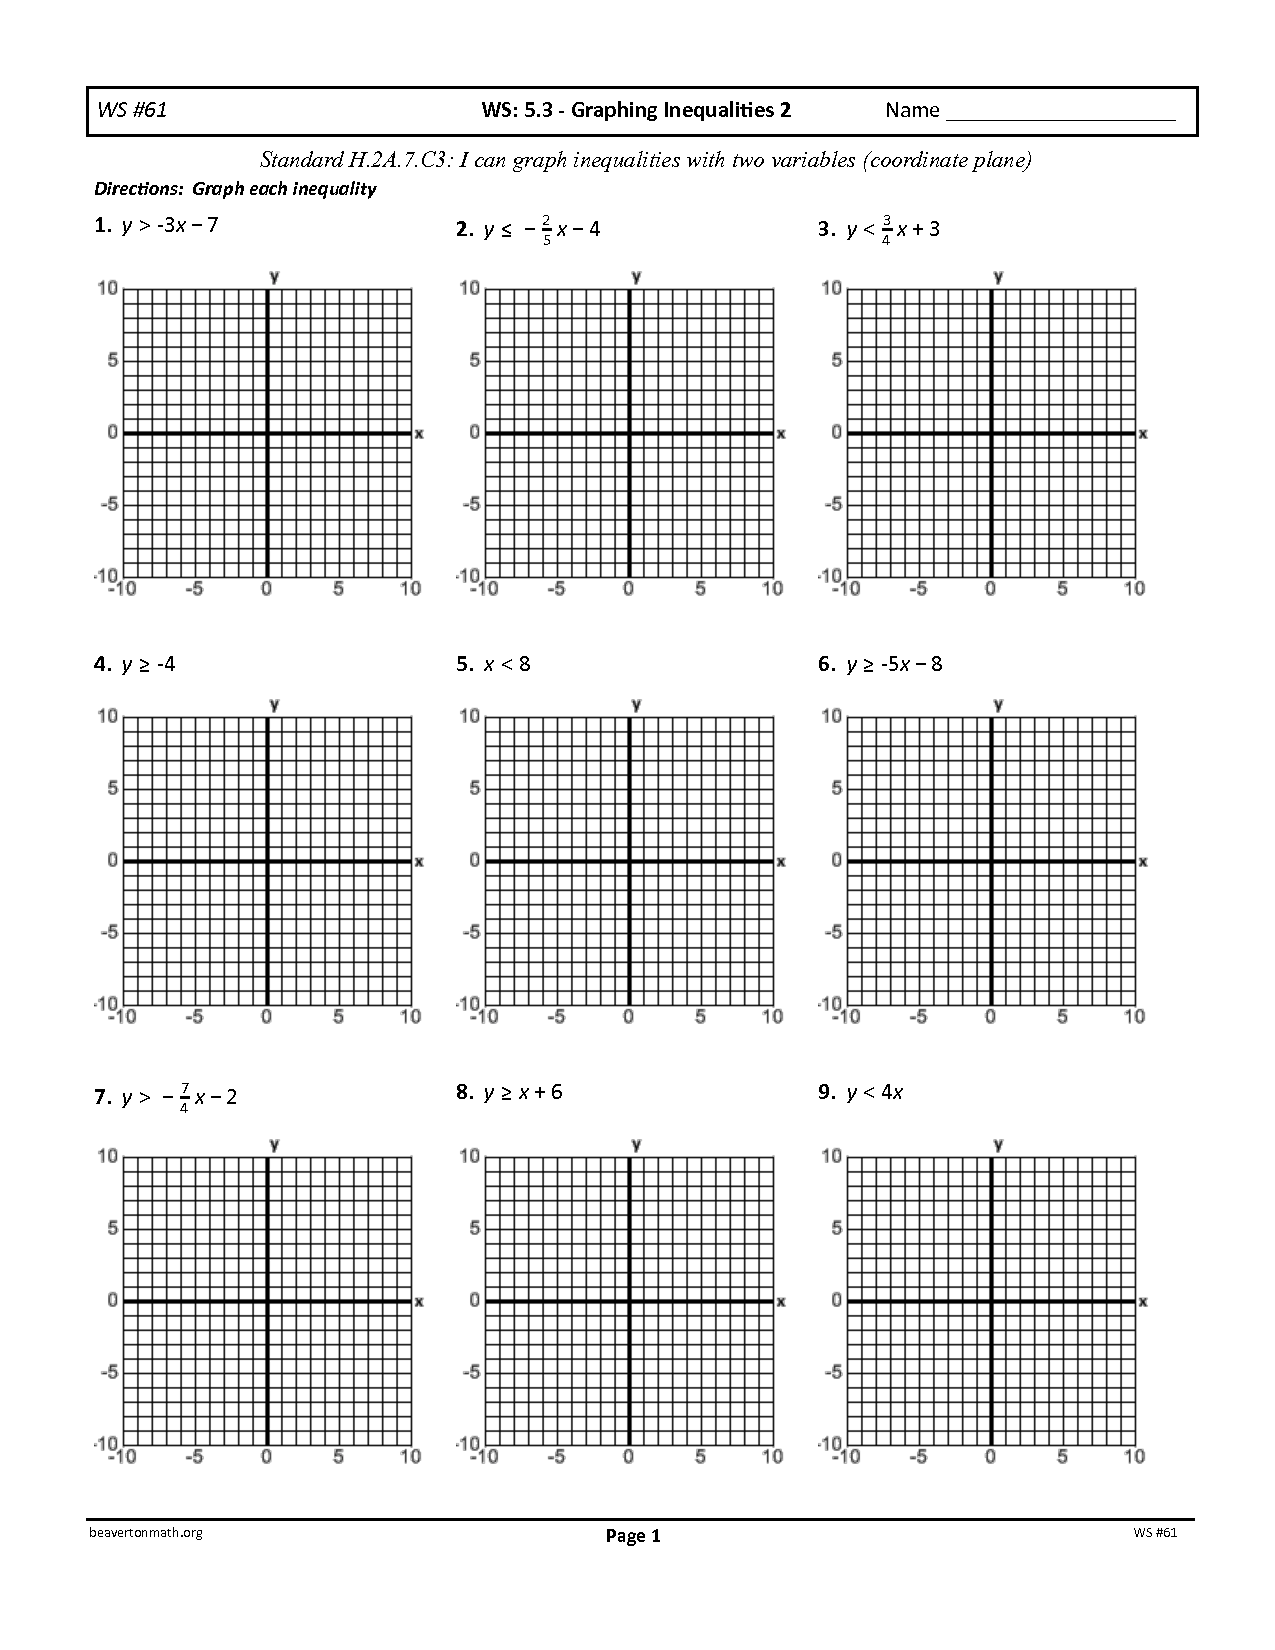 Graphing Inequalities On a Coordinate Plane Worksheet Image